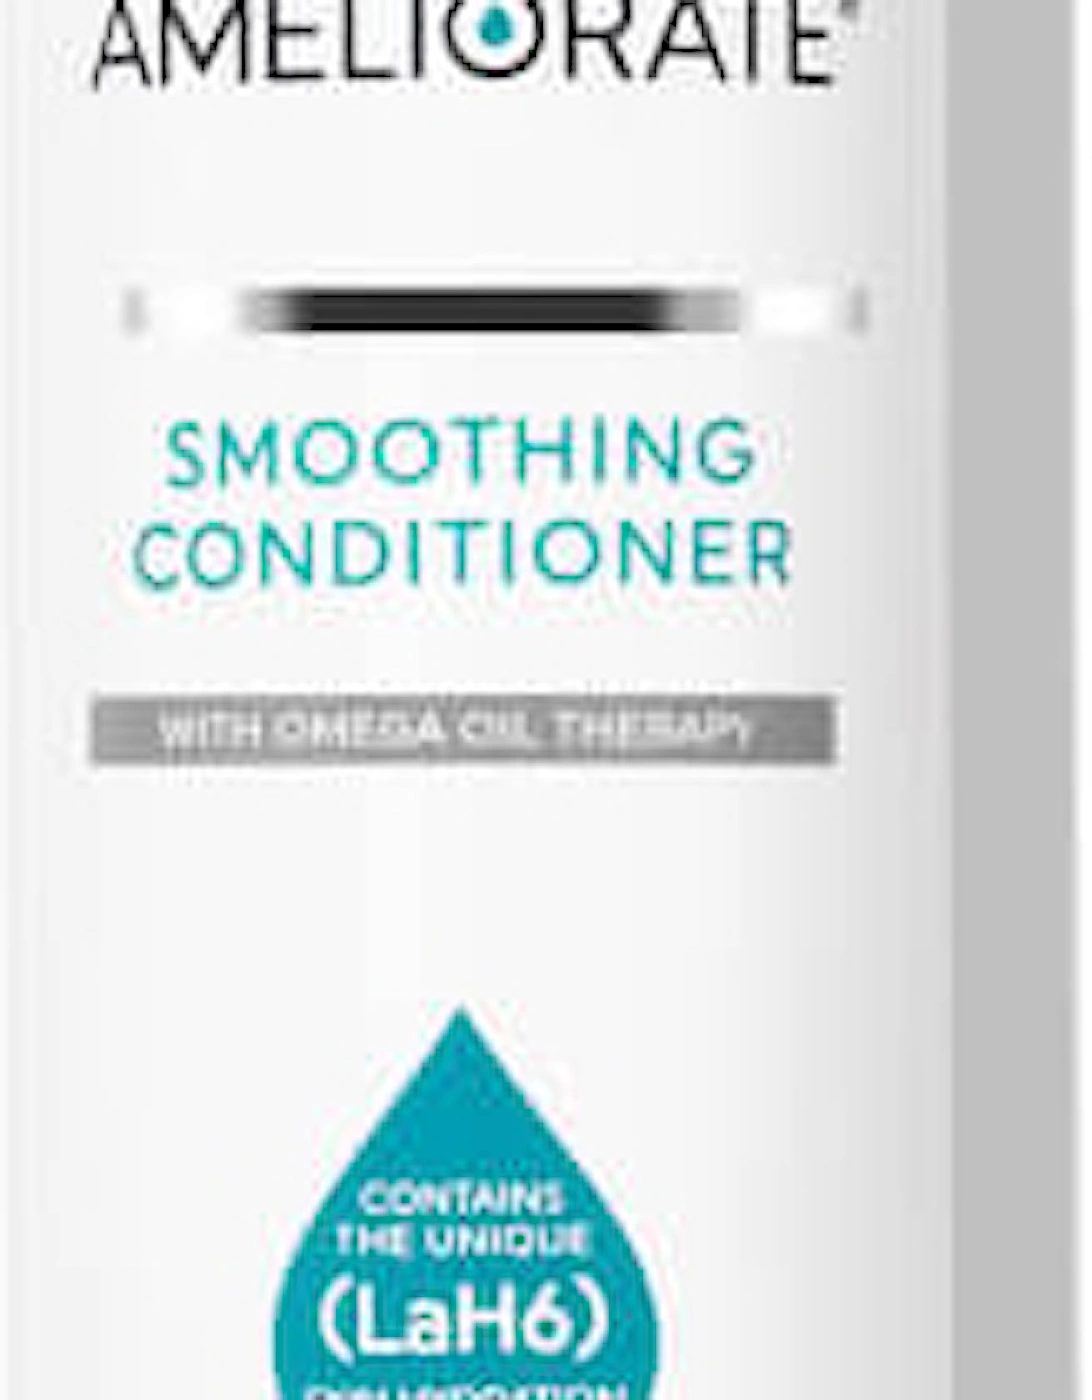 Smoothing Conditioner 250ml - AMELIORATE, 2 of 1